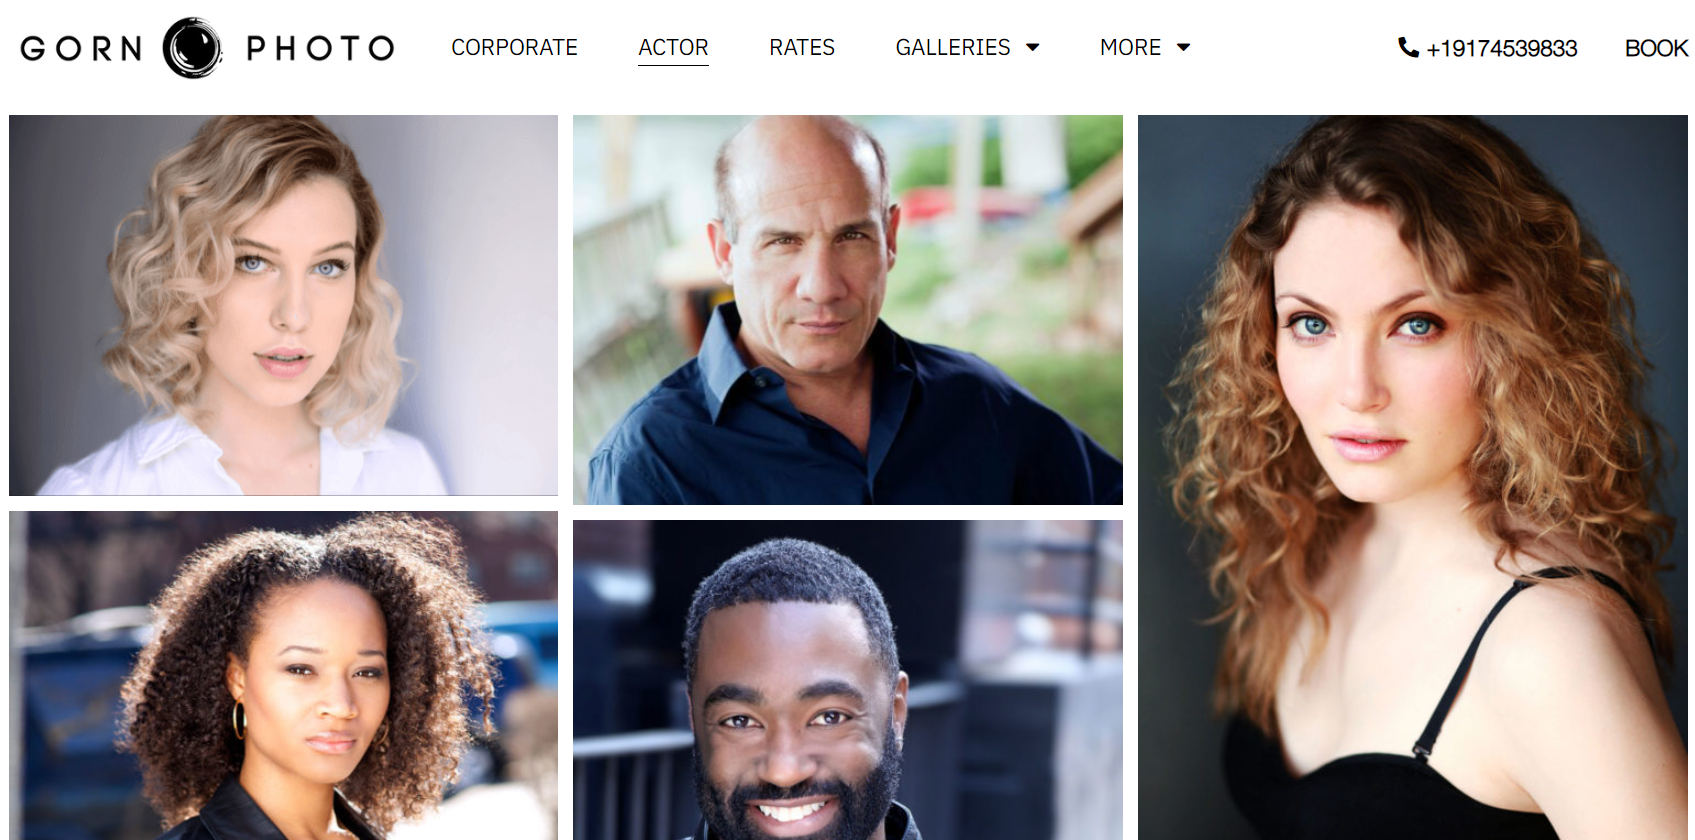 Embody Your Craft with GORNPHOTO Actor Headshots